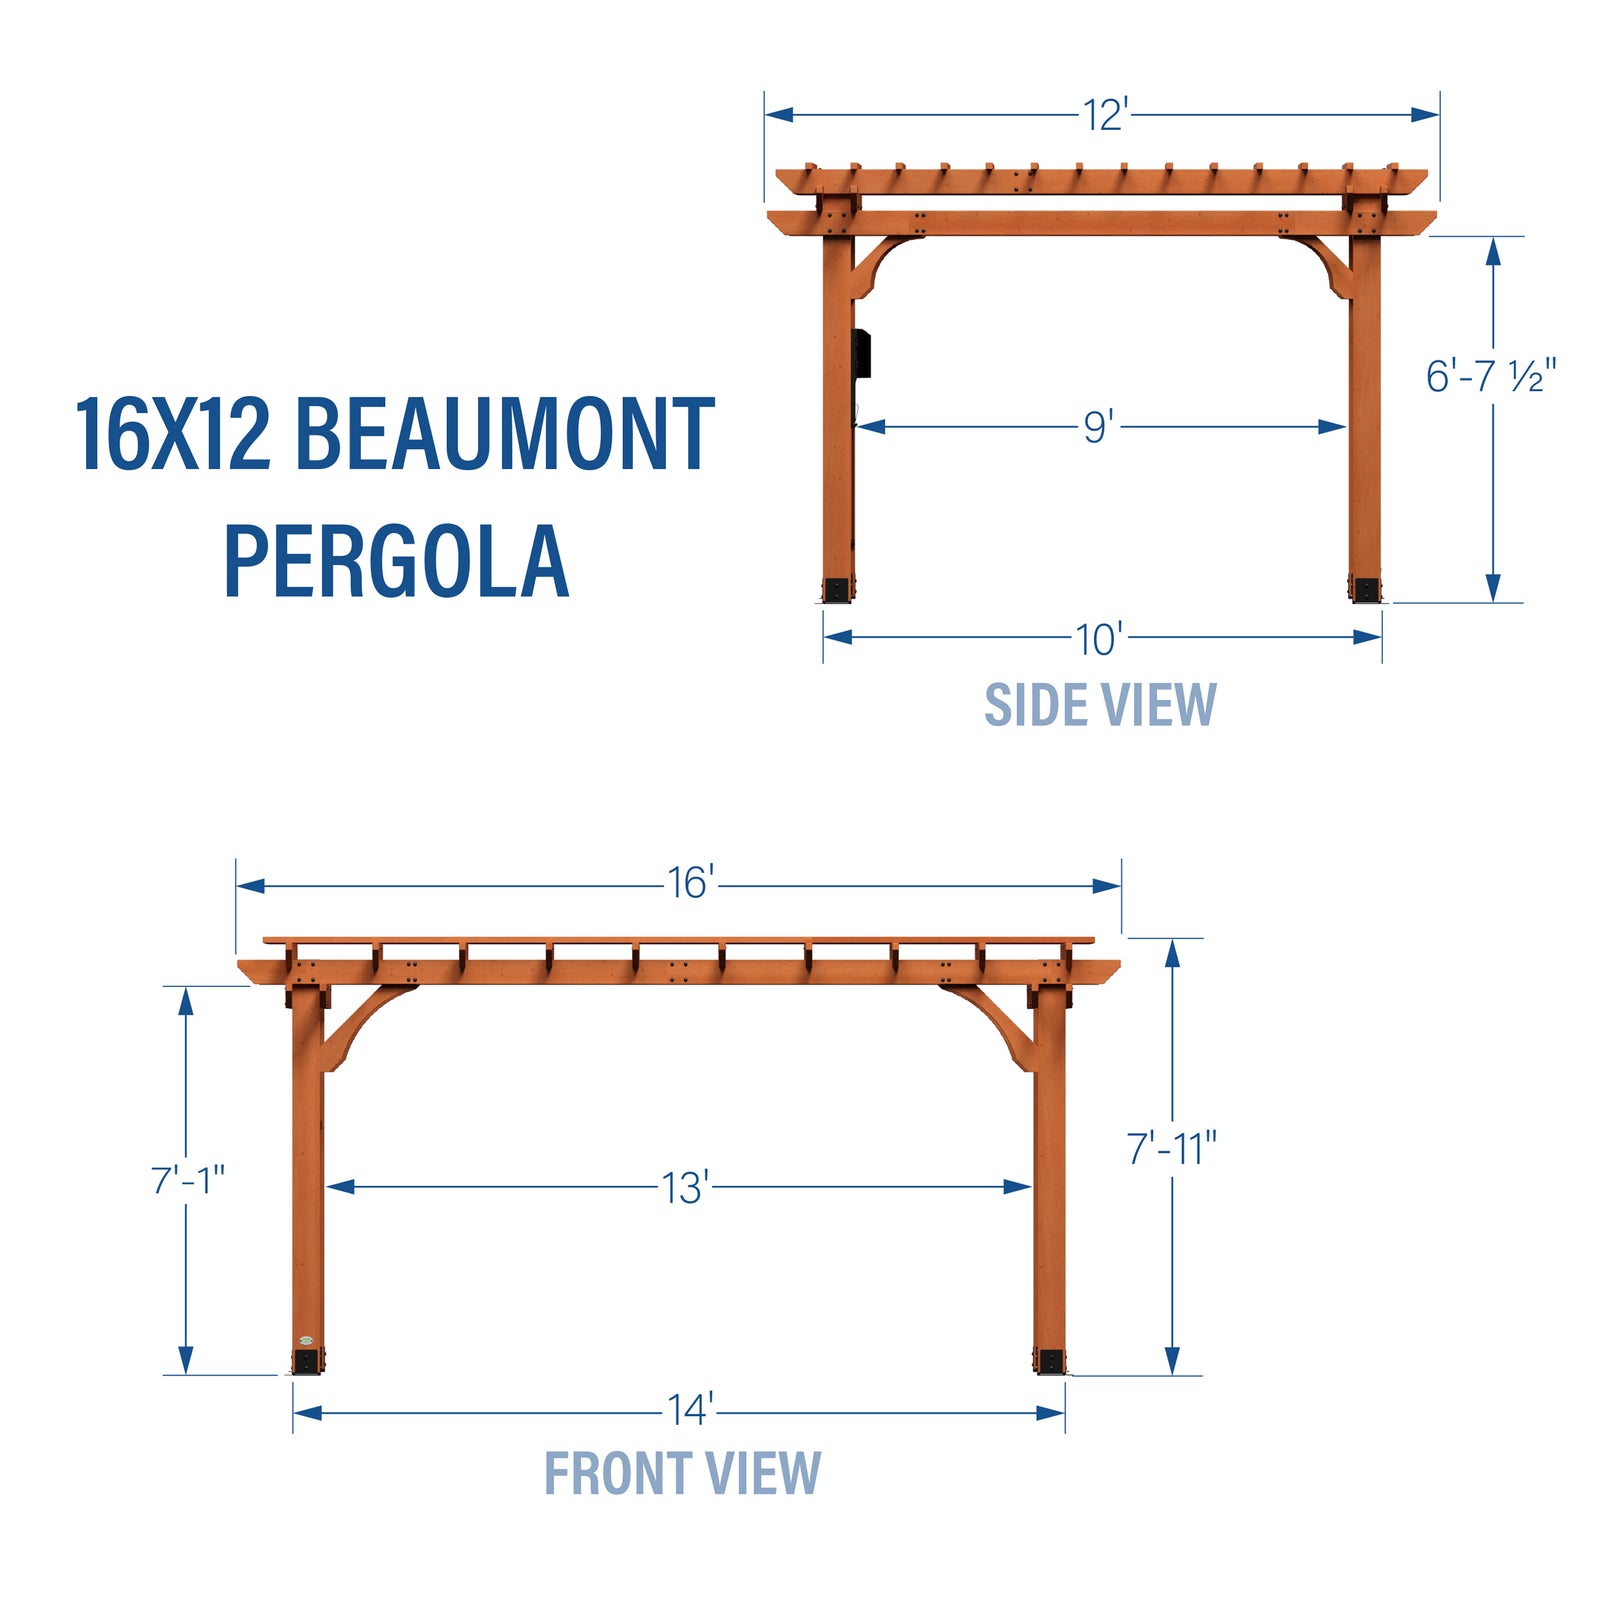 Load image into Gallery viewer, 16x12 Beaumont Pergola Diagram
